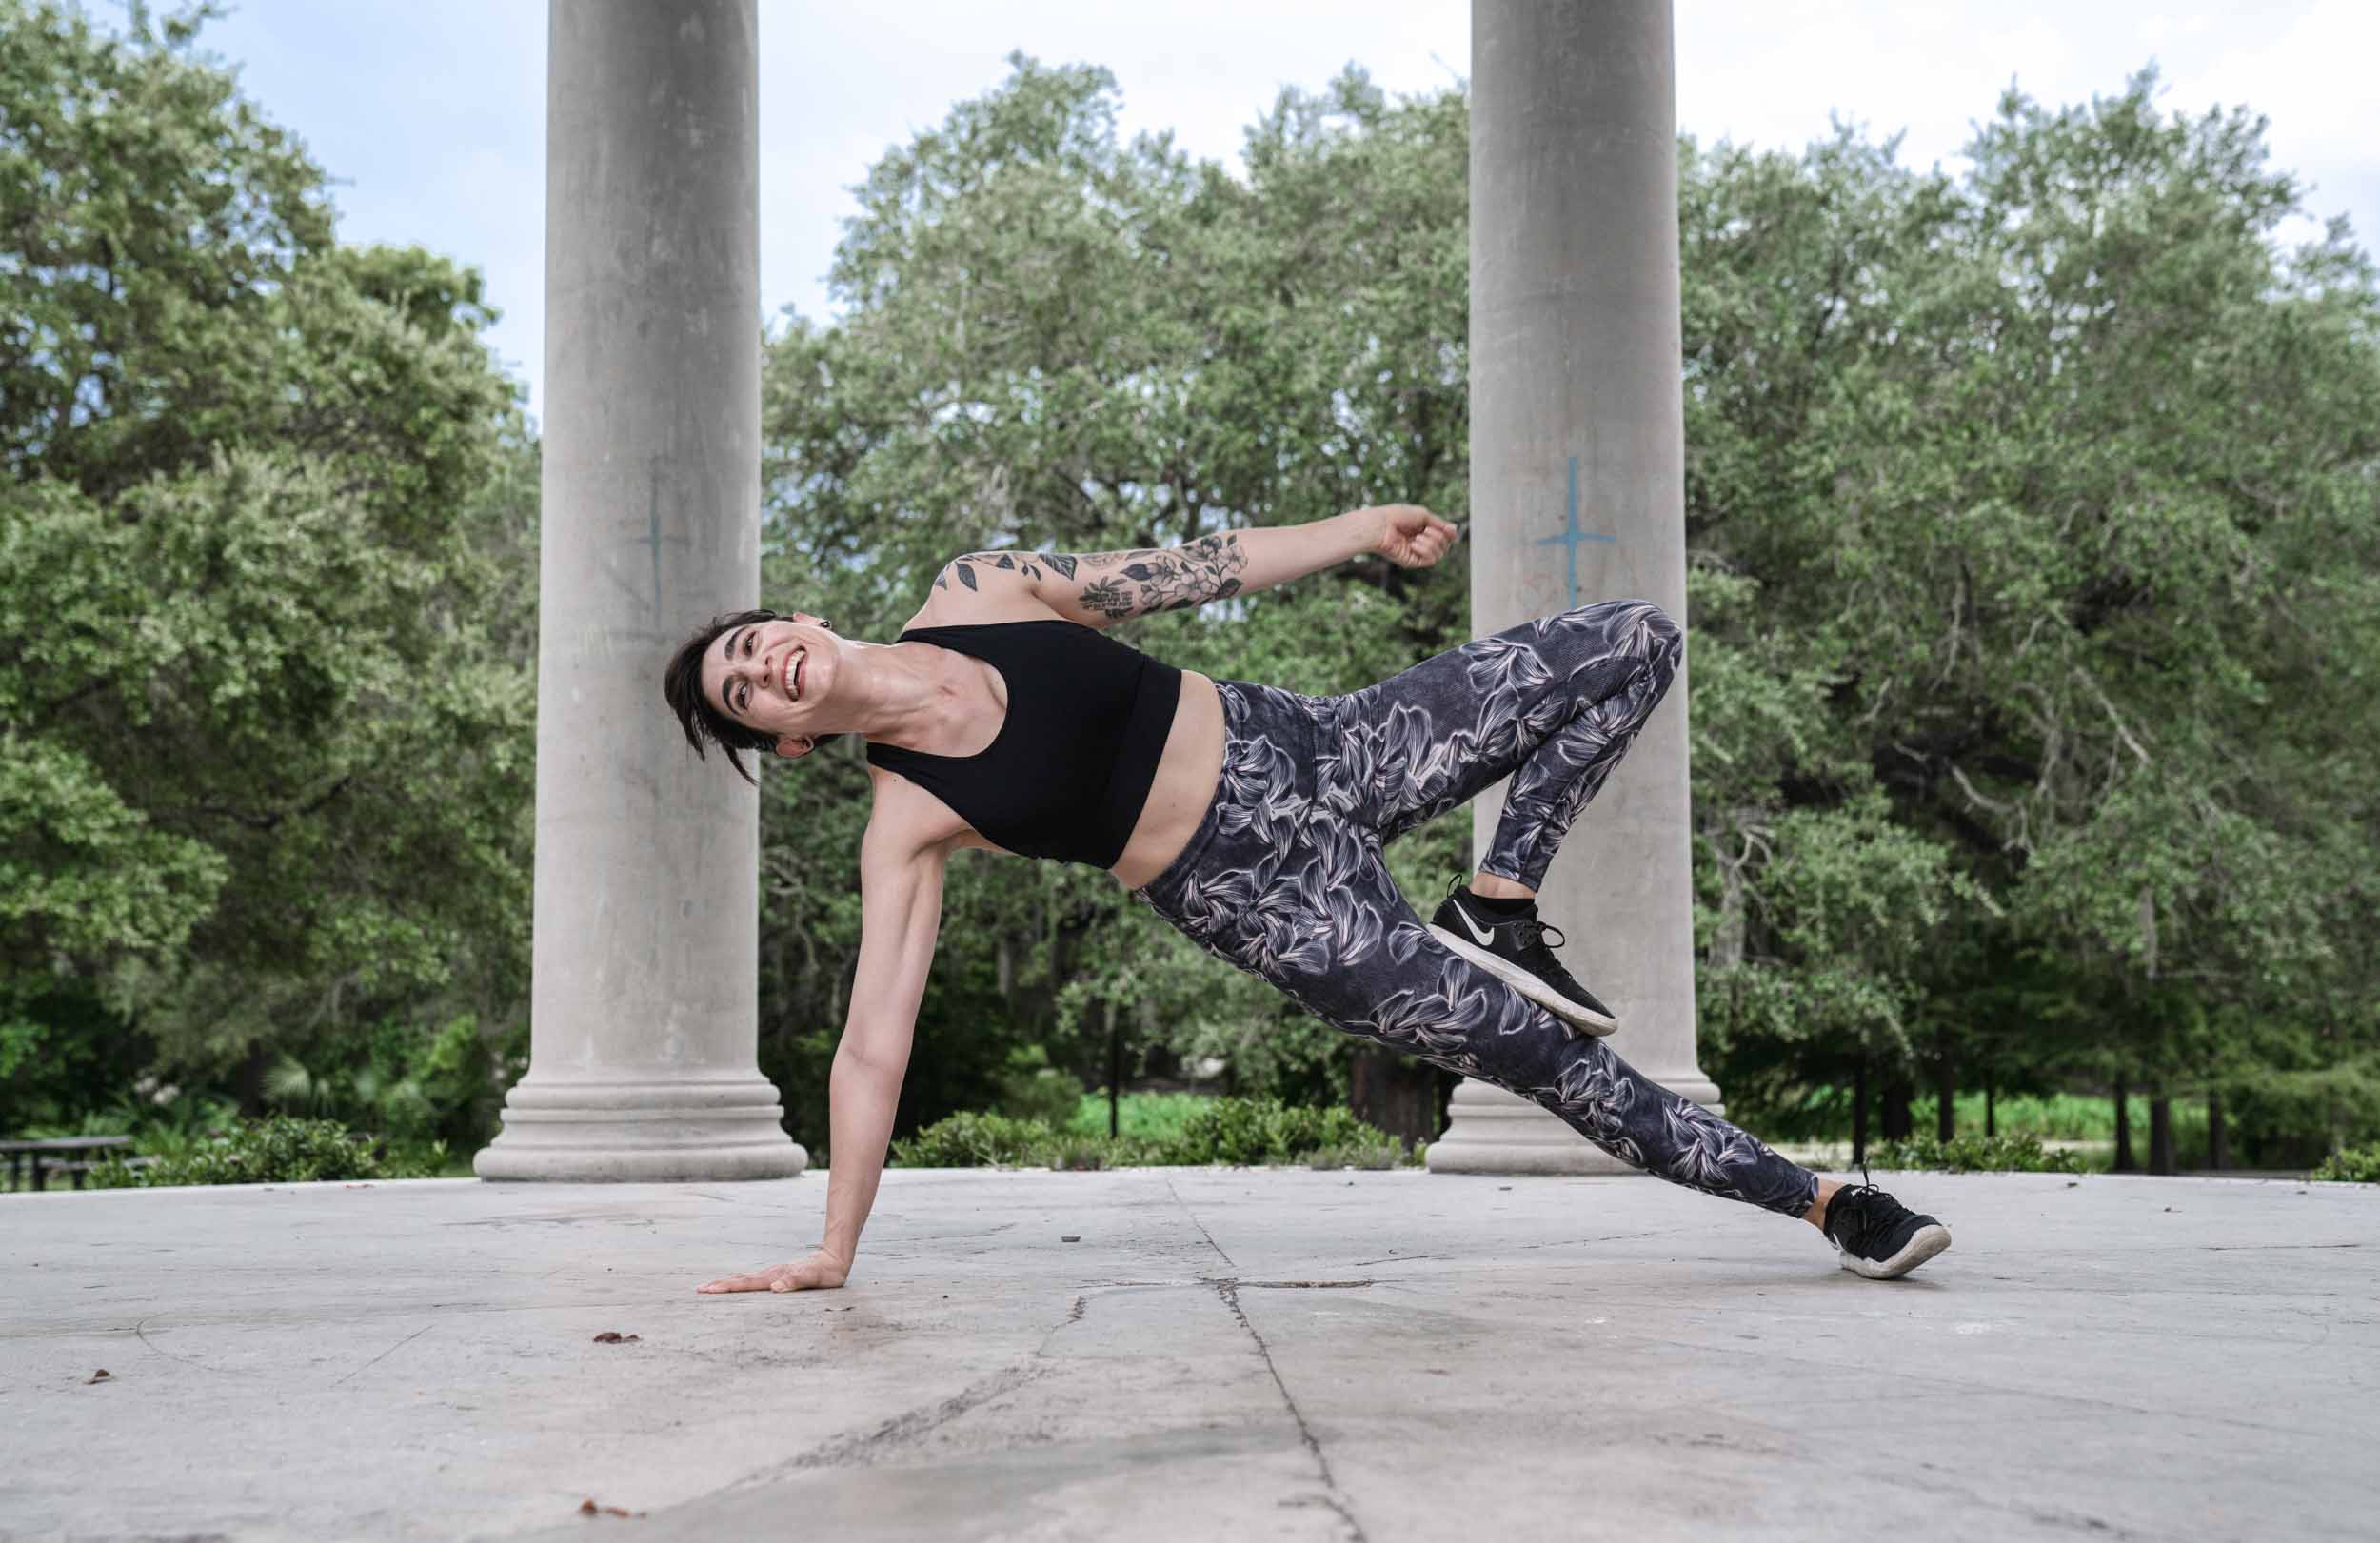 A yoga teacher smiling and laughing while posing on a monument in New Orleans City Park